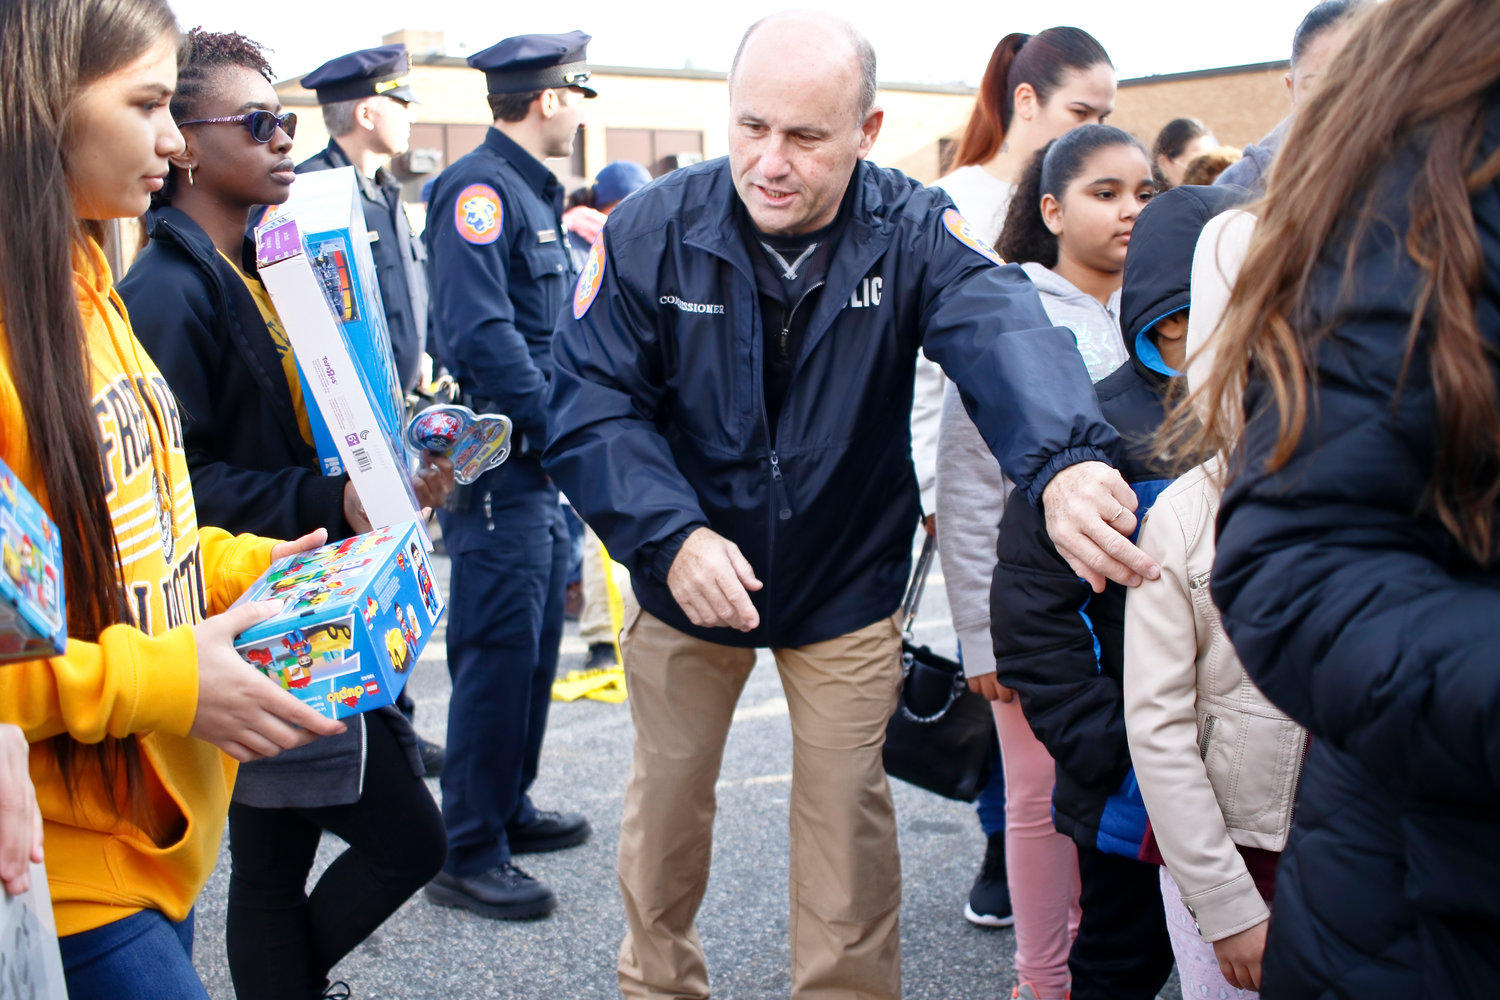 Police Commissioner Patrick Ryder helped hand out toys to the hundreds of children gathered at Freeport High School.